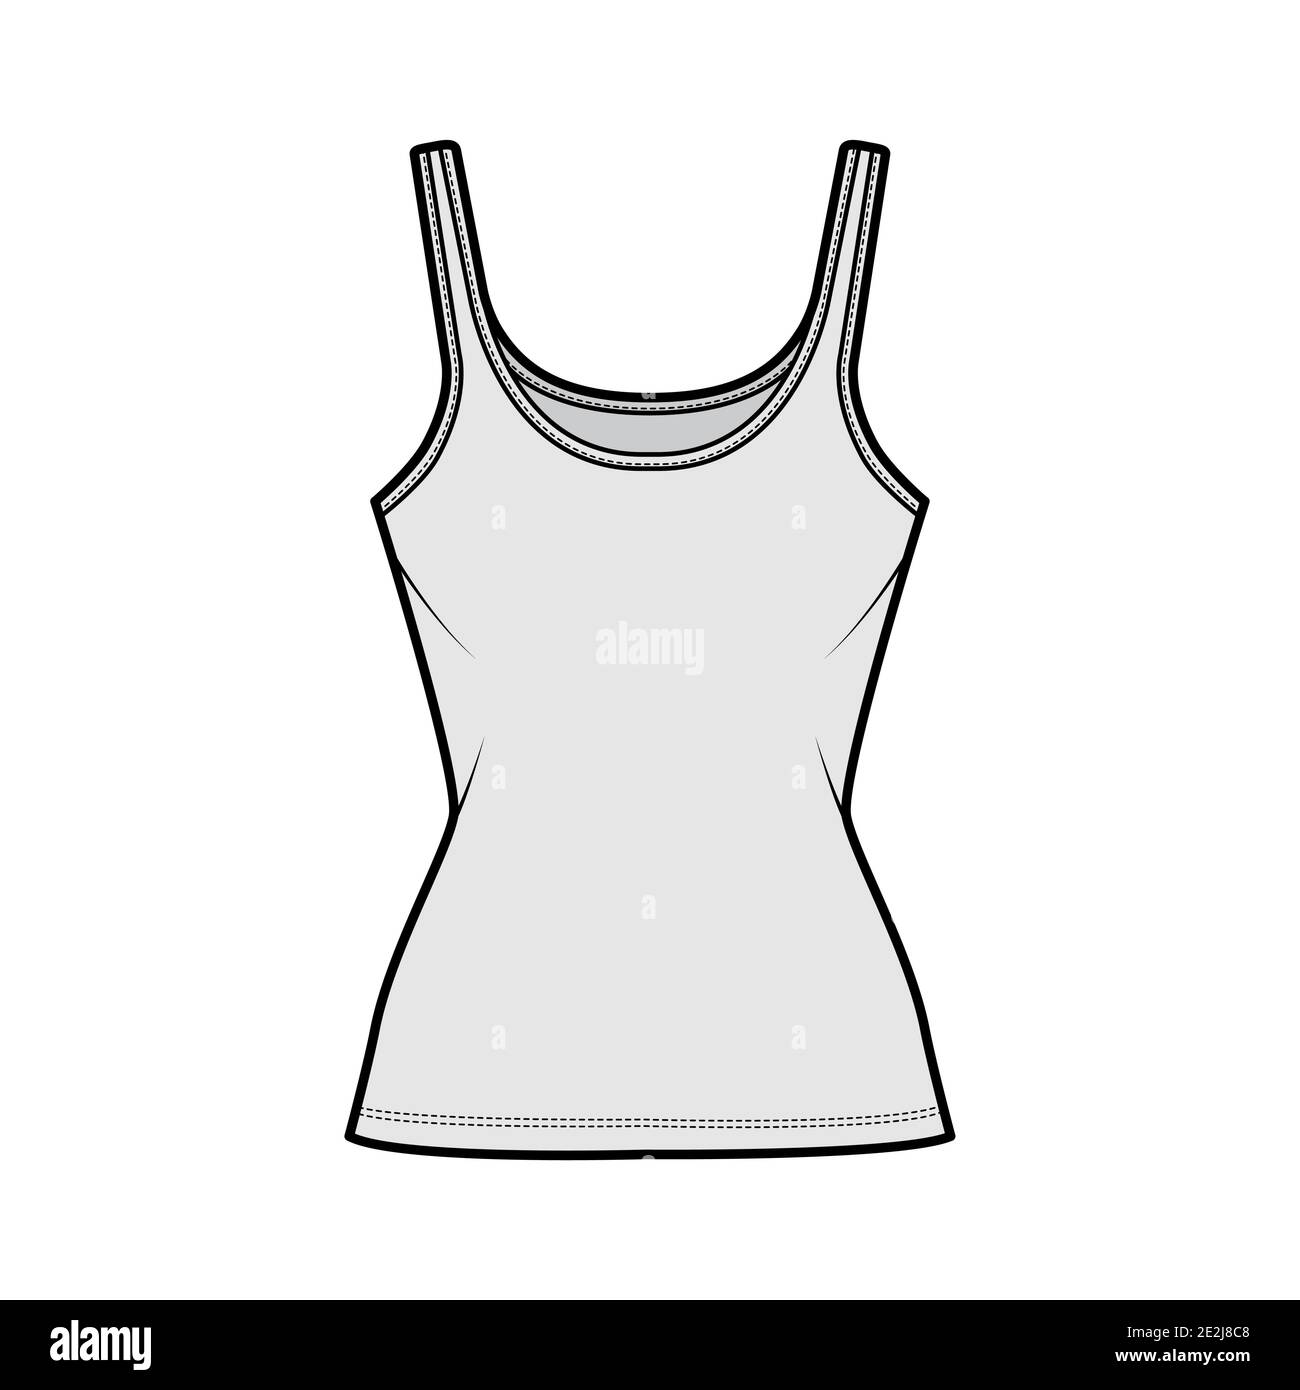 Cotton-jersey tank technical fashion illustration with scoop neck ...